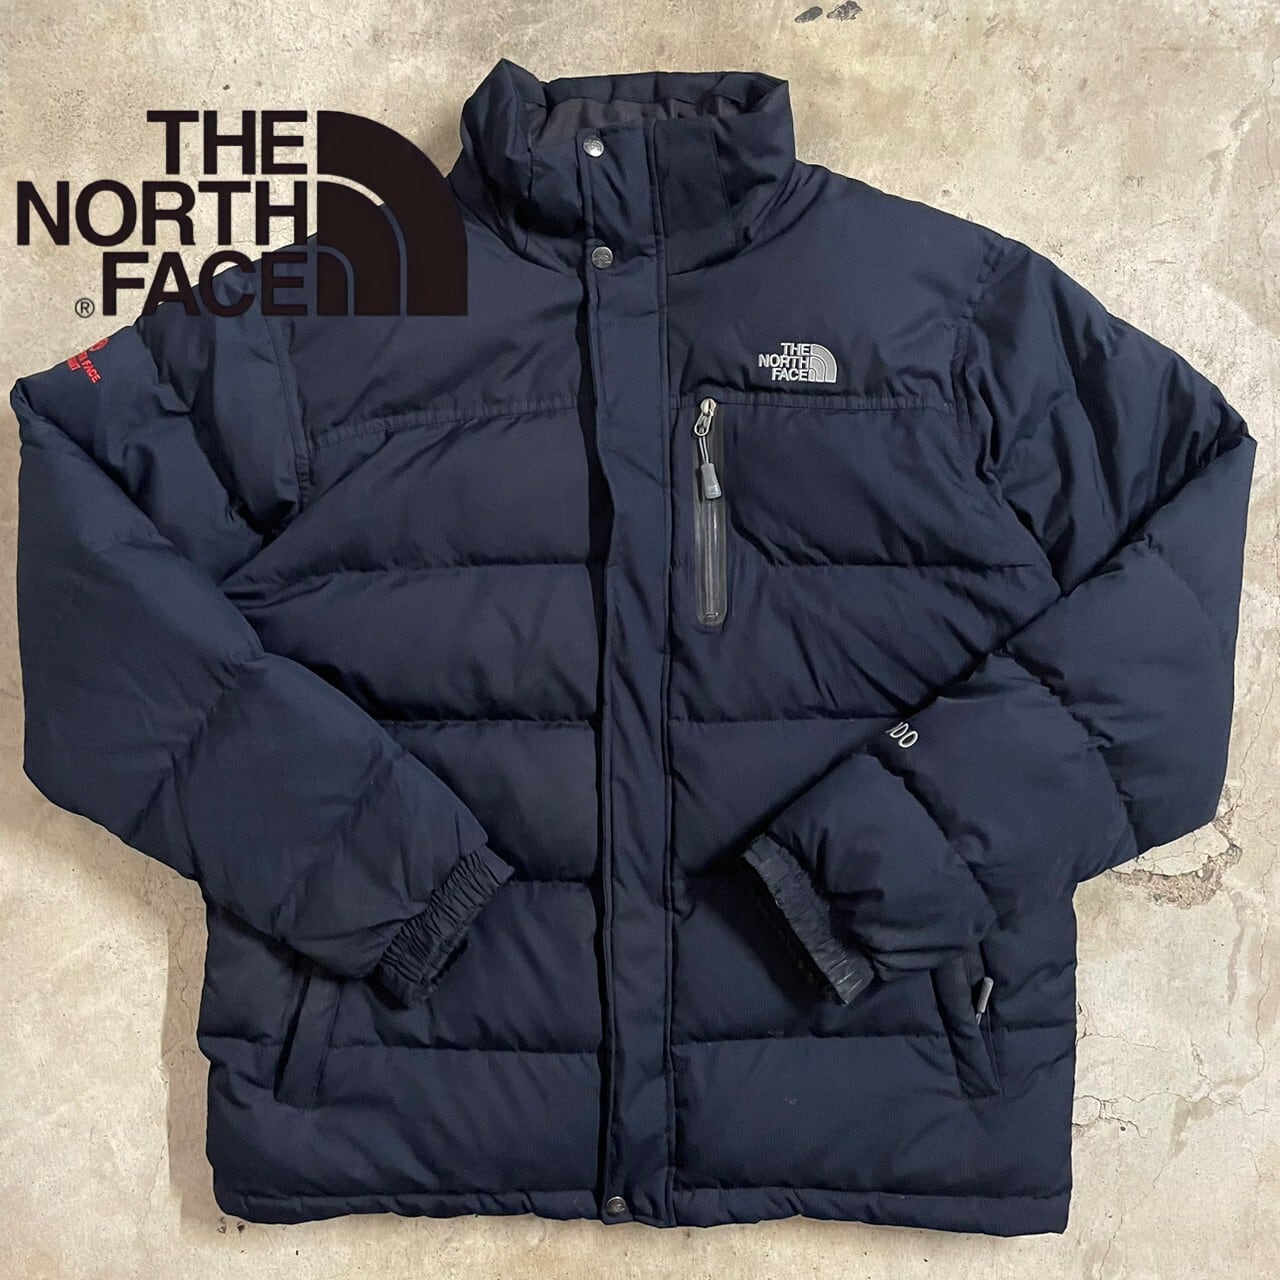 【THE NORTH FACE】logo embroidery 900 fill power down jacket/ザ・ノースフェイス ロゴ刺繍  900フィルパワー ダウンジャケット/xlsize/#0719/osaka | 〚ETON_VINTAGE〛 powered by BASE